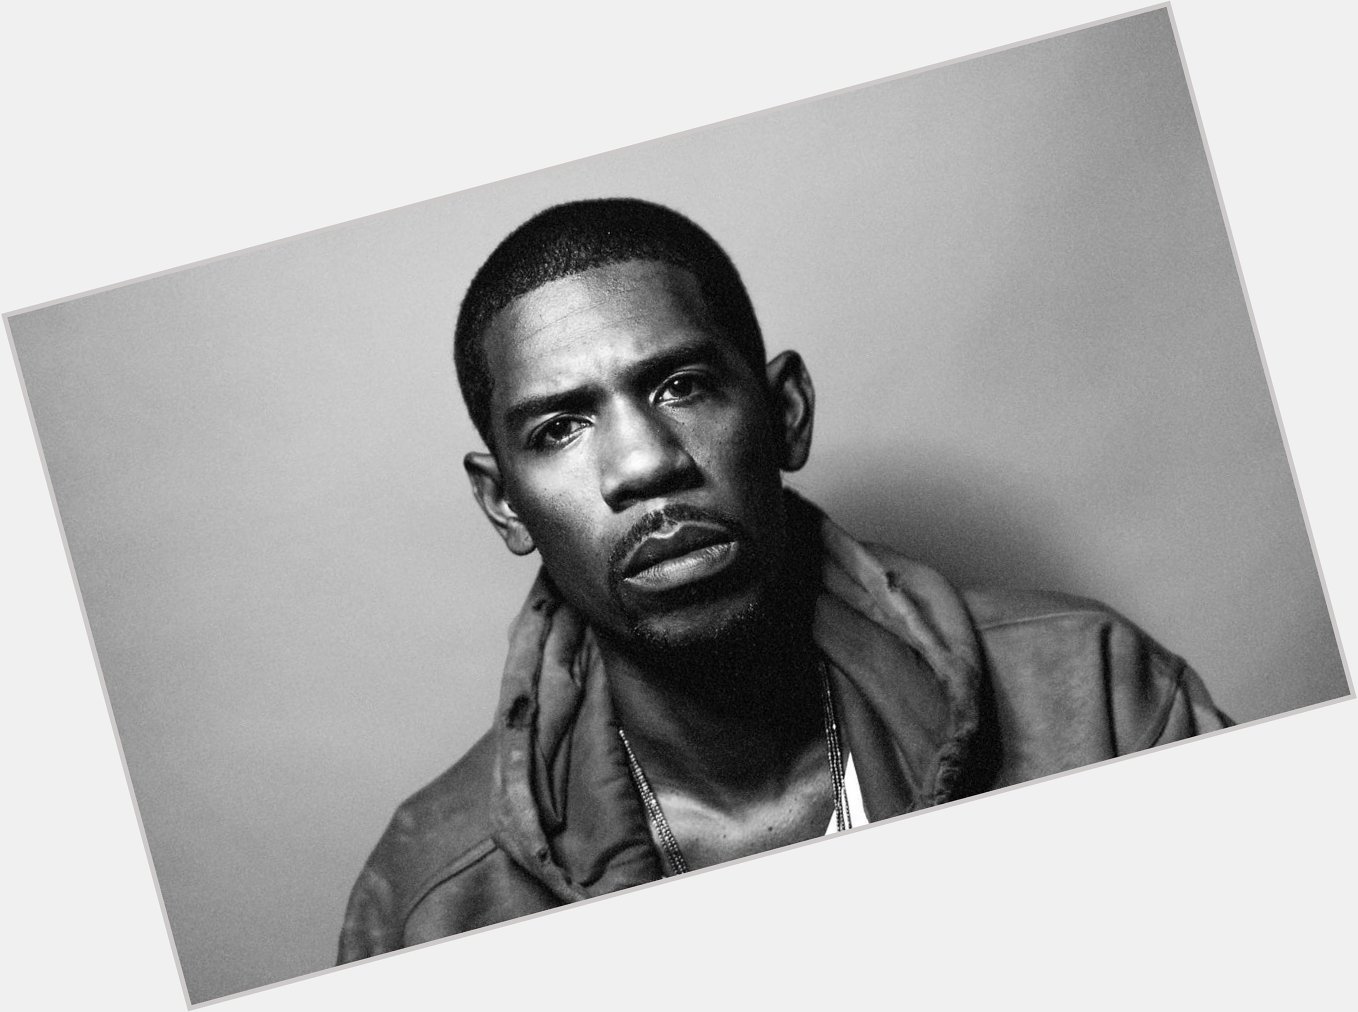 Today in Hip Hop History: 
Happy birthday to Young Guru!  He was born February 24, 1974 